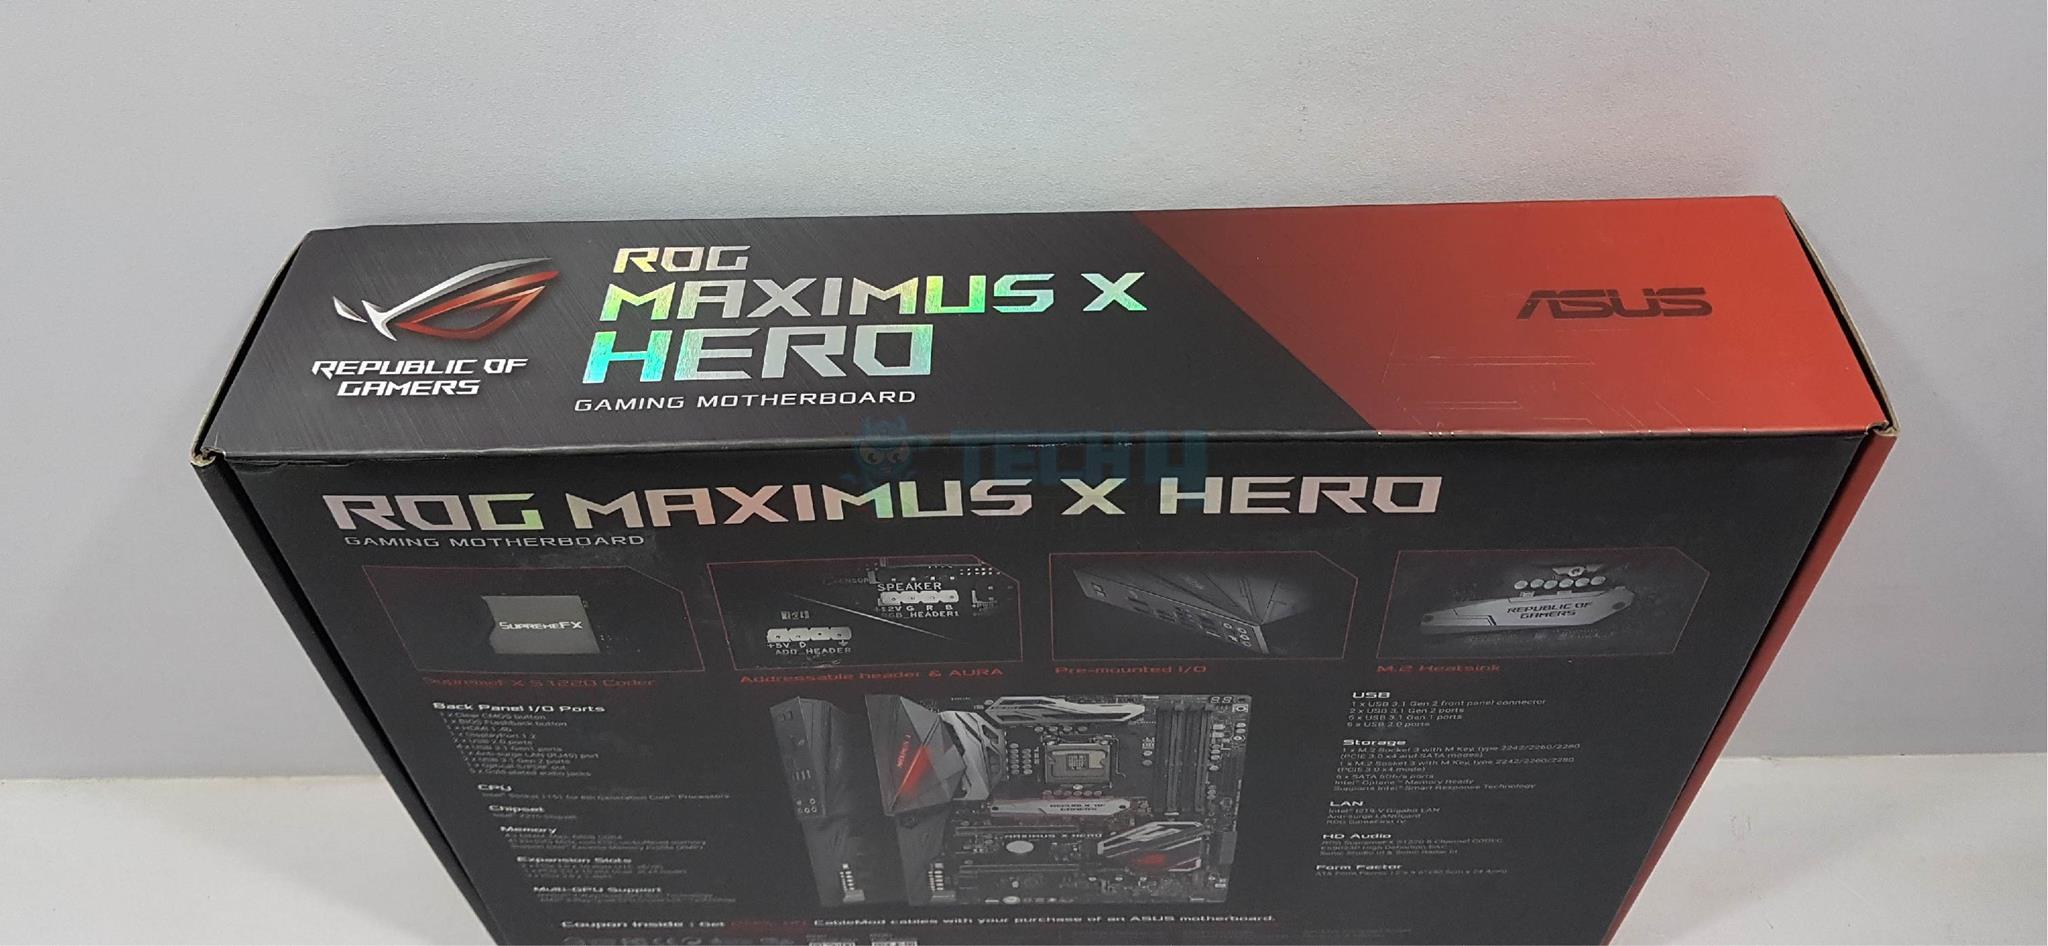 Asus ROG Maximus X Hero Right and Rear Side Packaging 